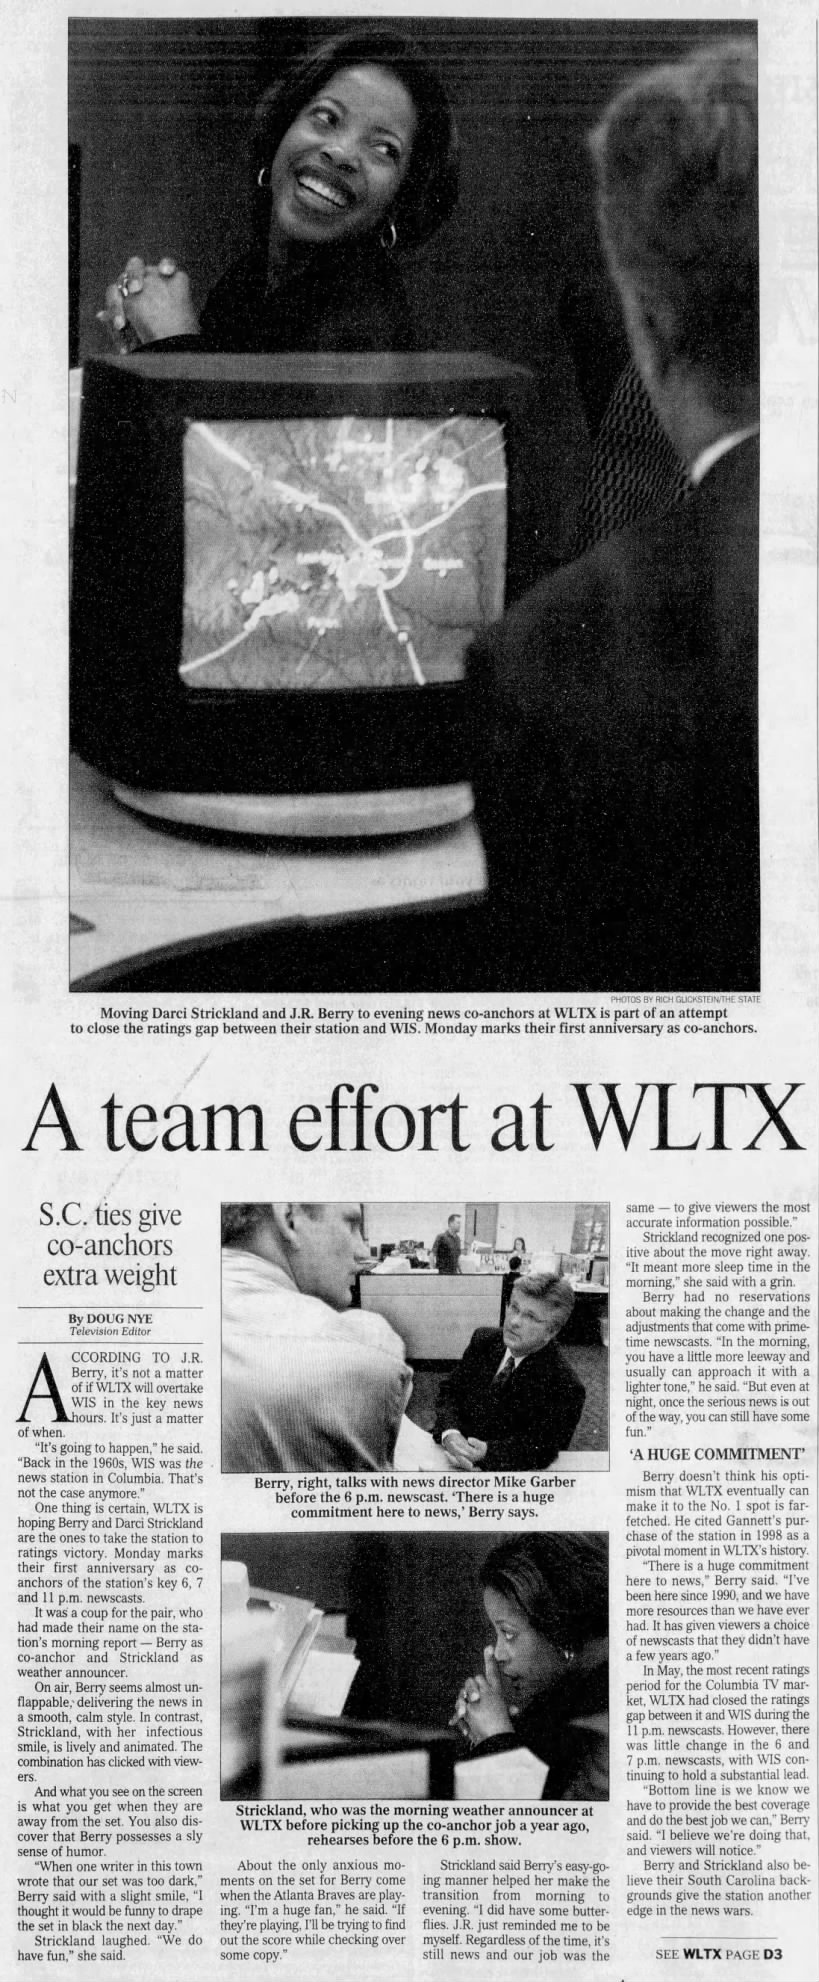 A team effort at WLTX: S.C. ties give co-anchors extra weight